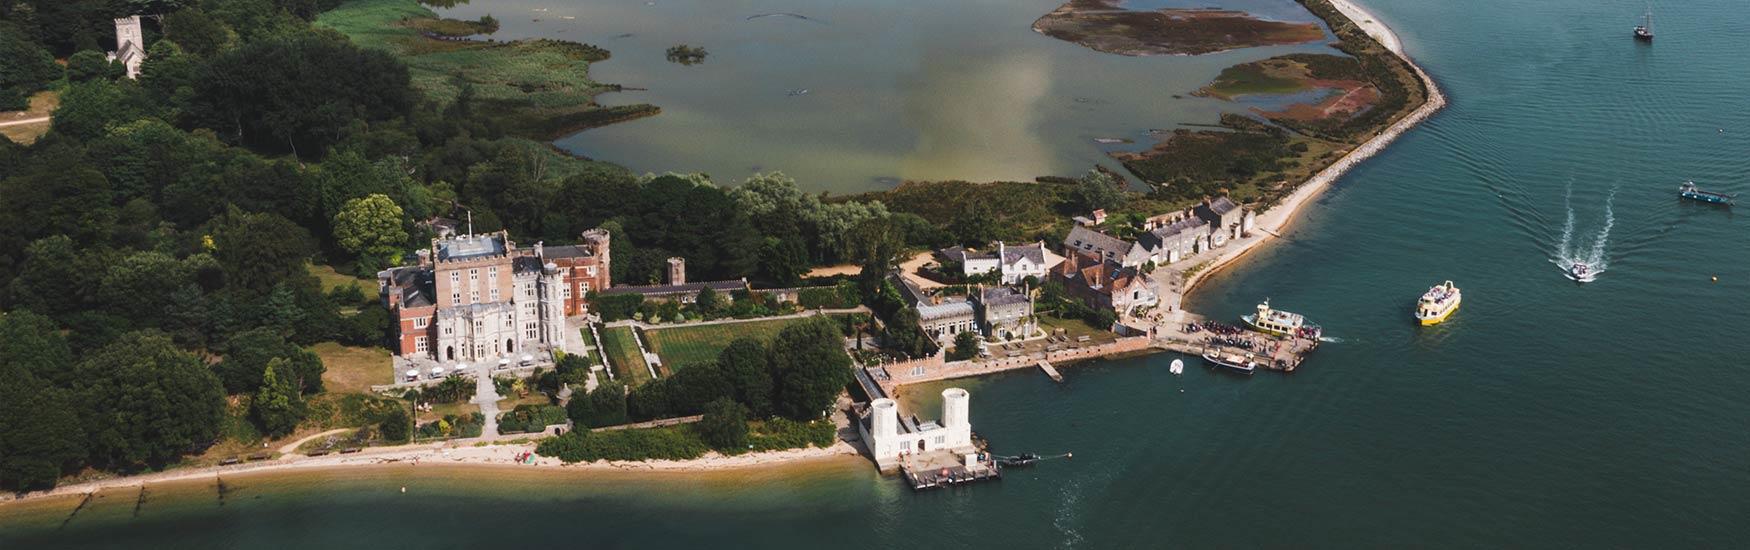 Aerial view of Brownsea island on a summers day